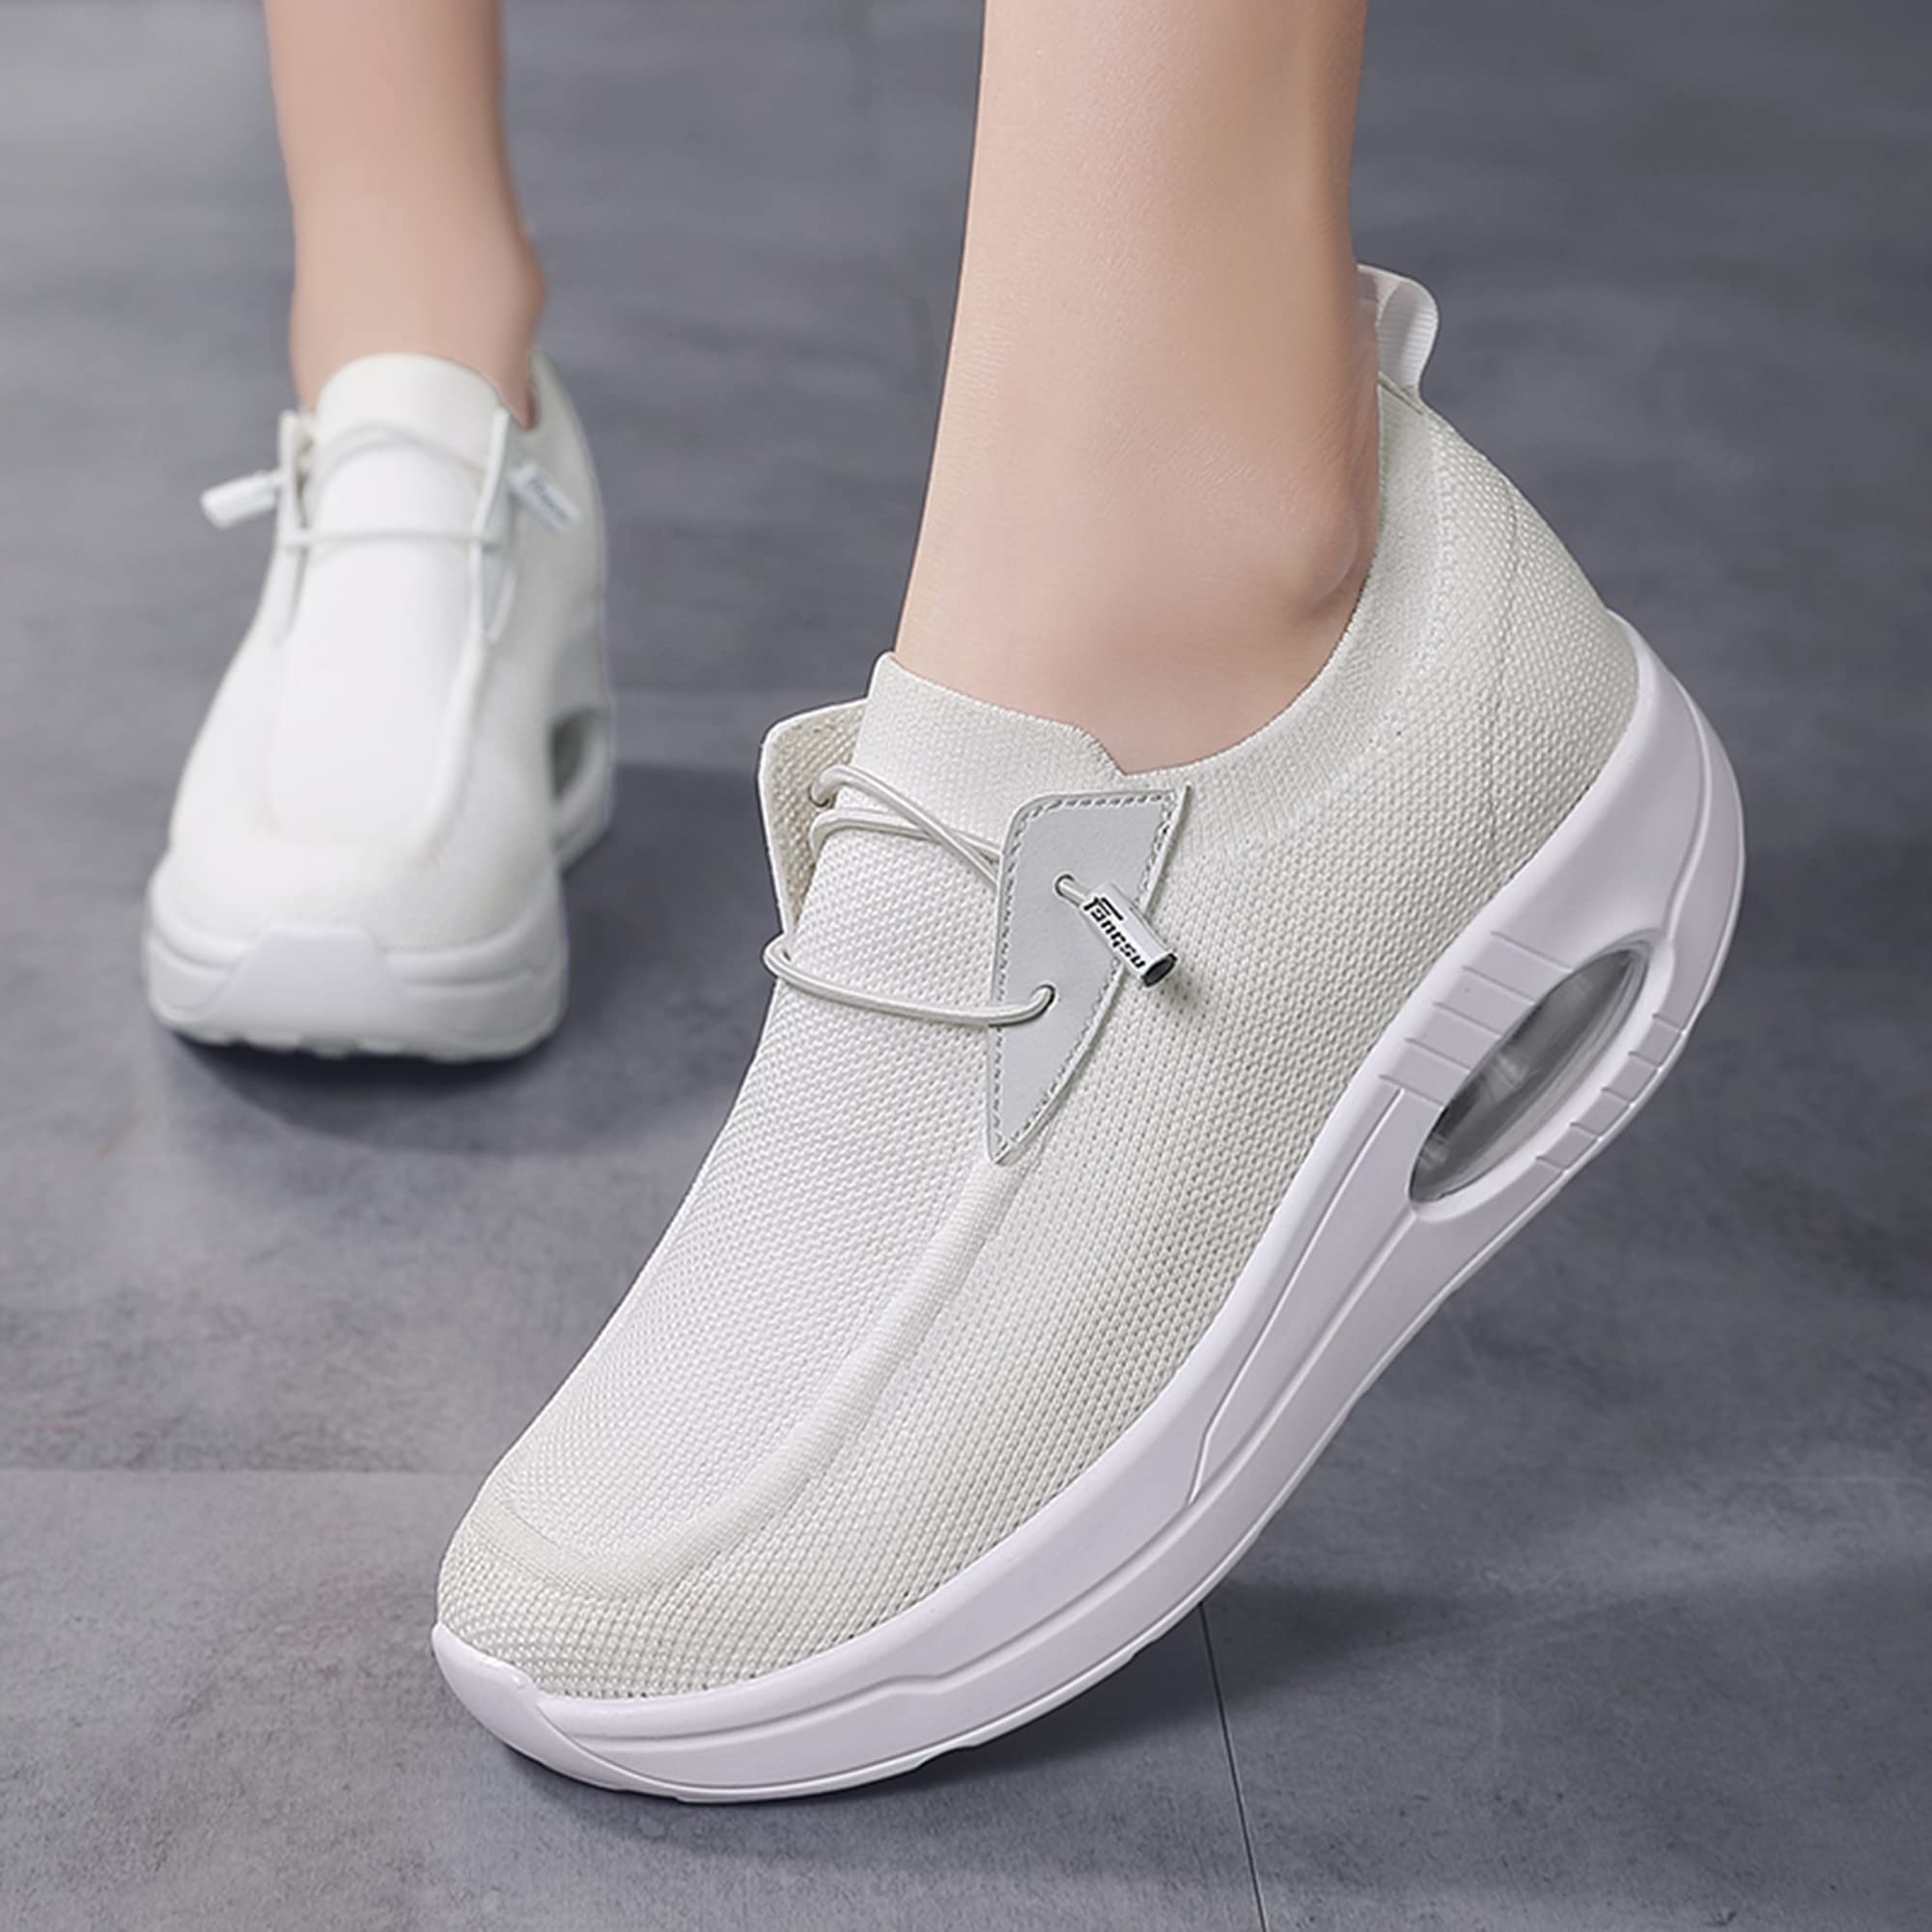 AUUGK White Women's Slip-on Walking Shoes Mesh Breathe Air Cushion Arch Support Sock Sneakers for Women Ladys Girls Fashion Platform Lightweight Loafers Non-Slip Nursing Work Running Shoes Size10